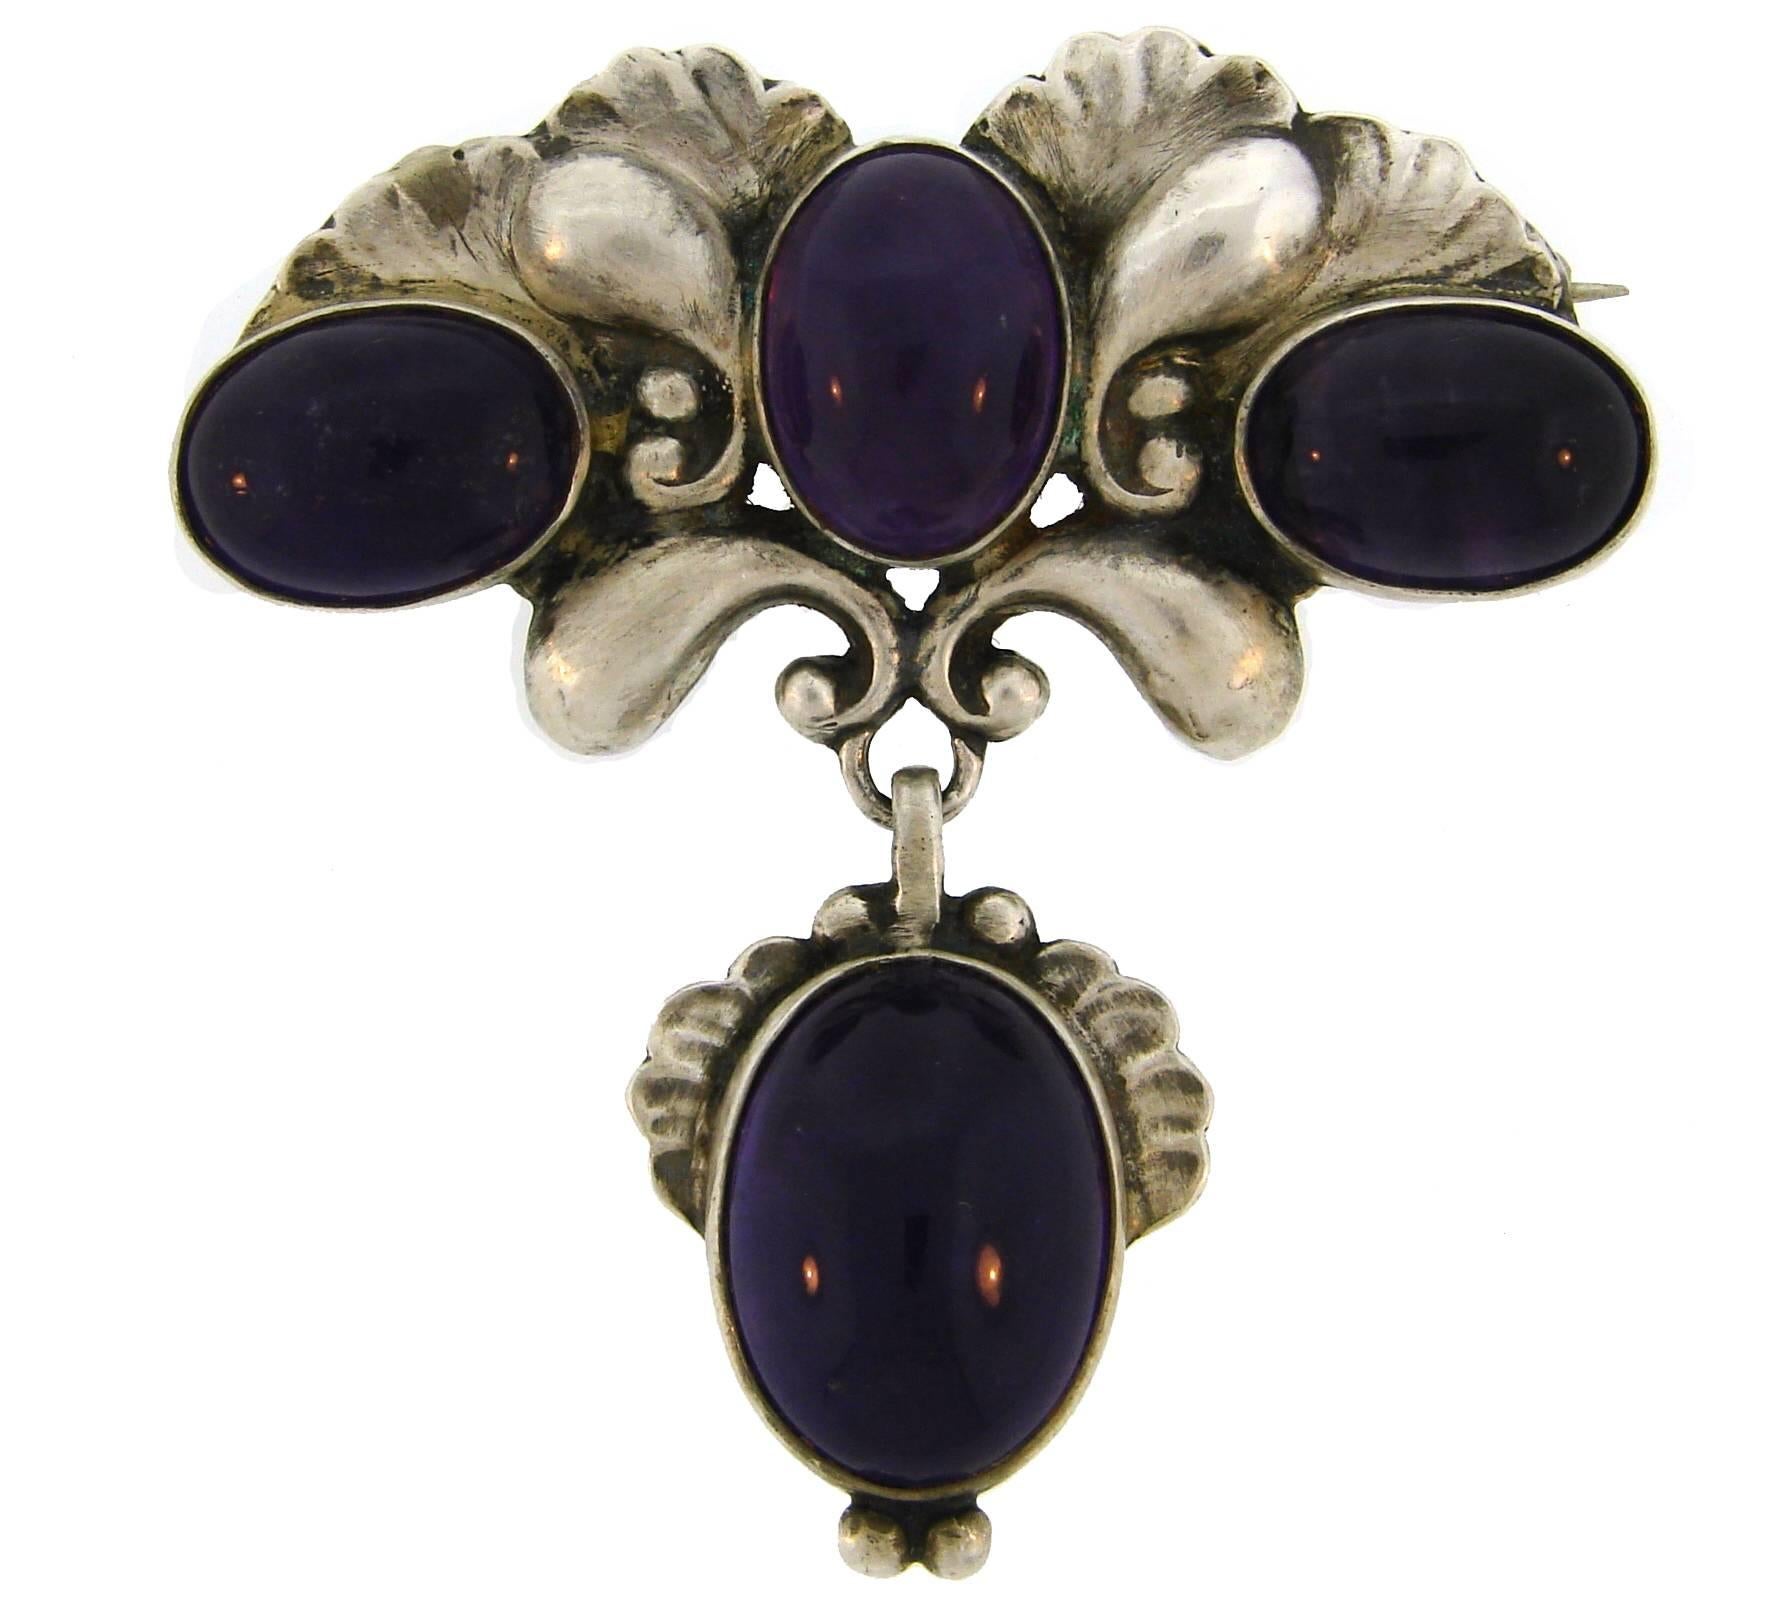 Lovely brooch created by Georg Jensen in Denmark.
It is made of sterling silver and amethyst. 
The brooch measures 2 x 2 inches (5 x 5 cm) and weighs 24.9 grams.
Stamped with Jensen maker's mark, a serial number, a country of manufacture, a